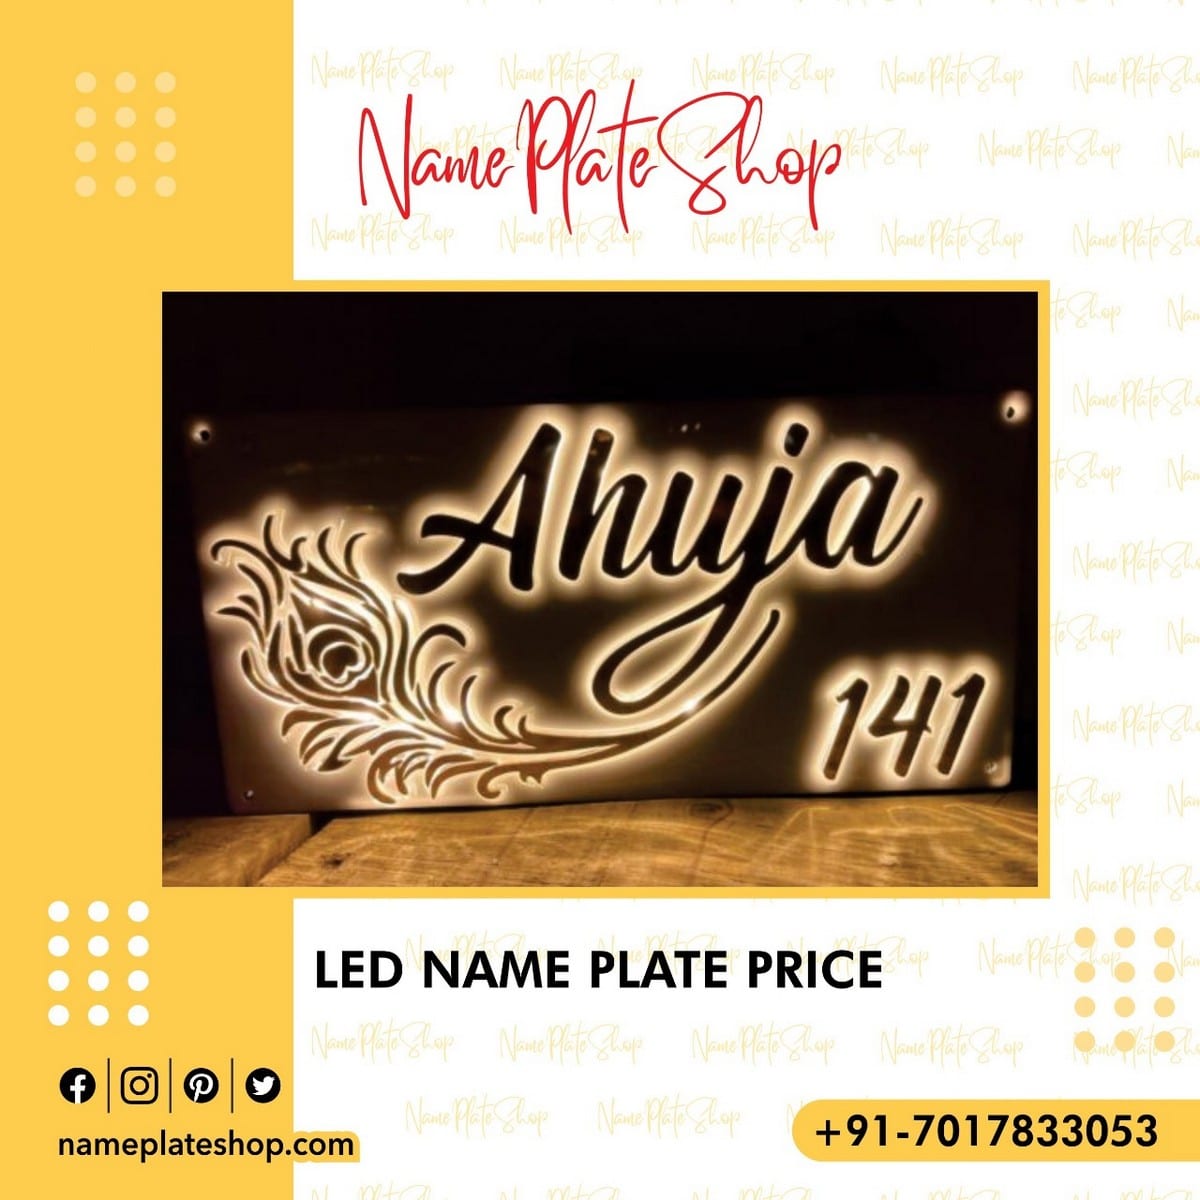 Best Led Name Plate With Affordable Price On Nameplateshop.com